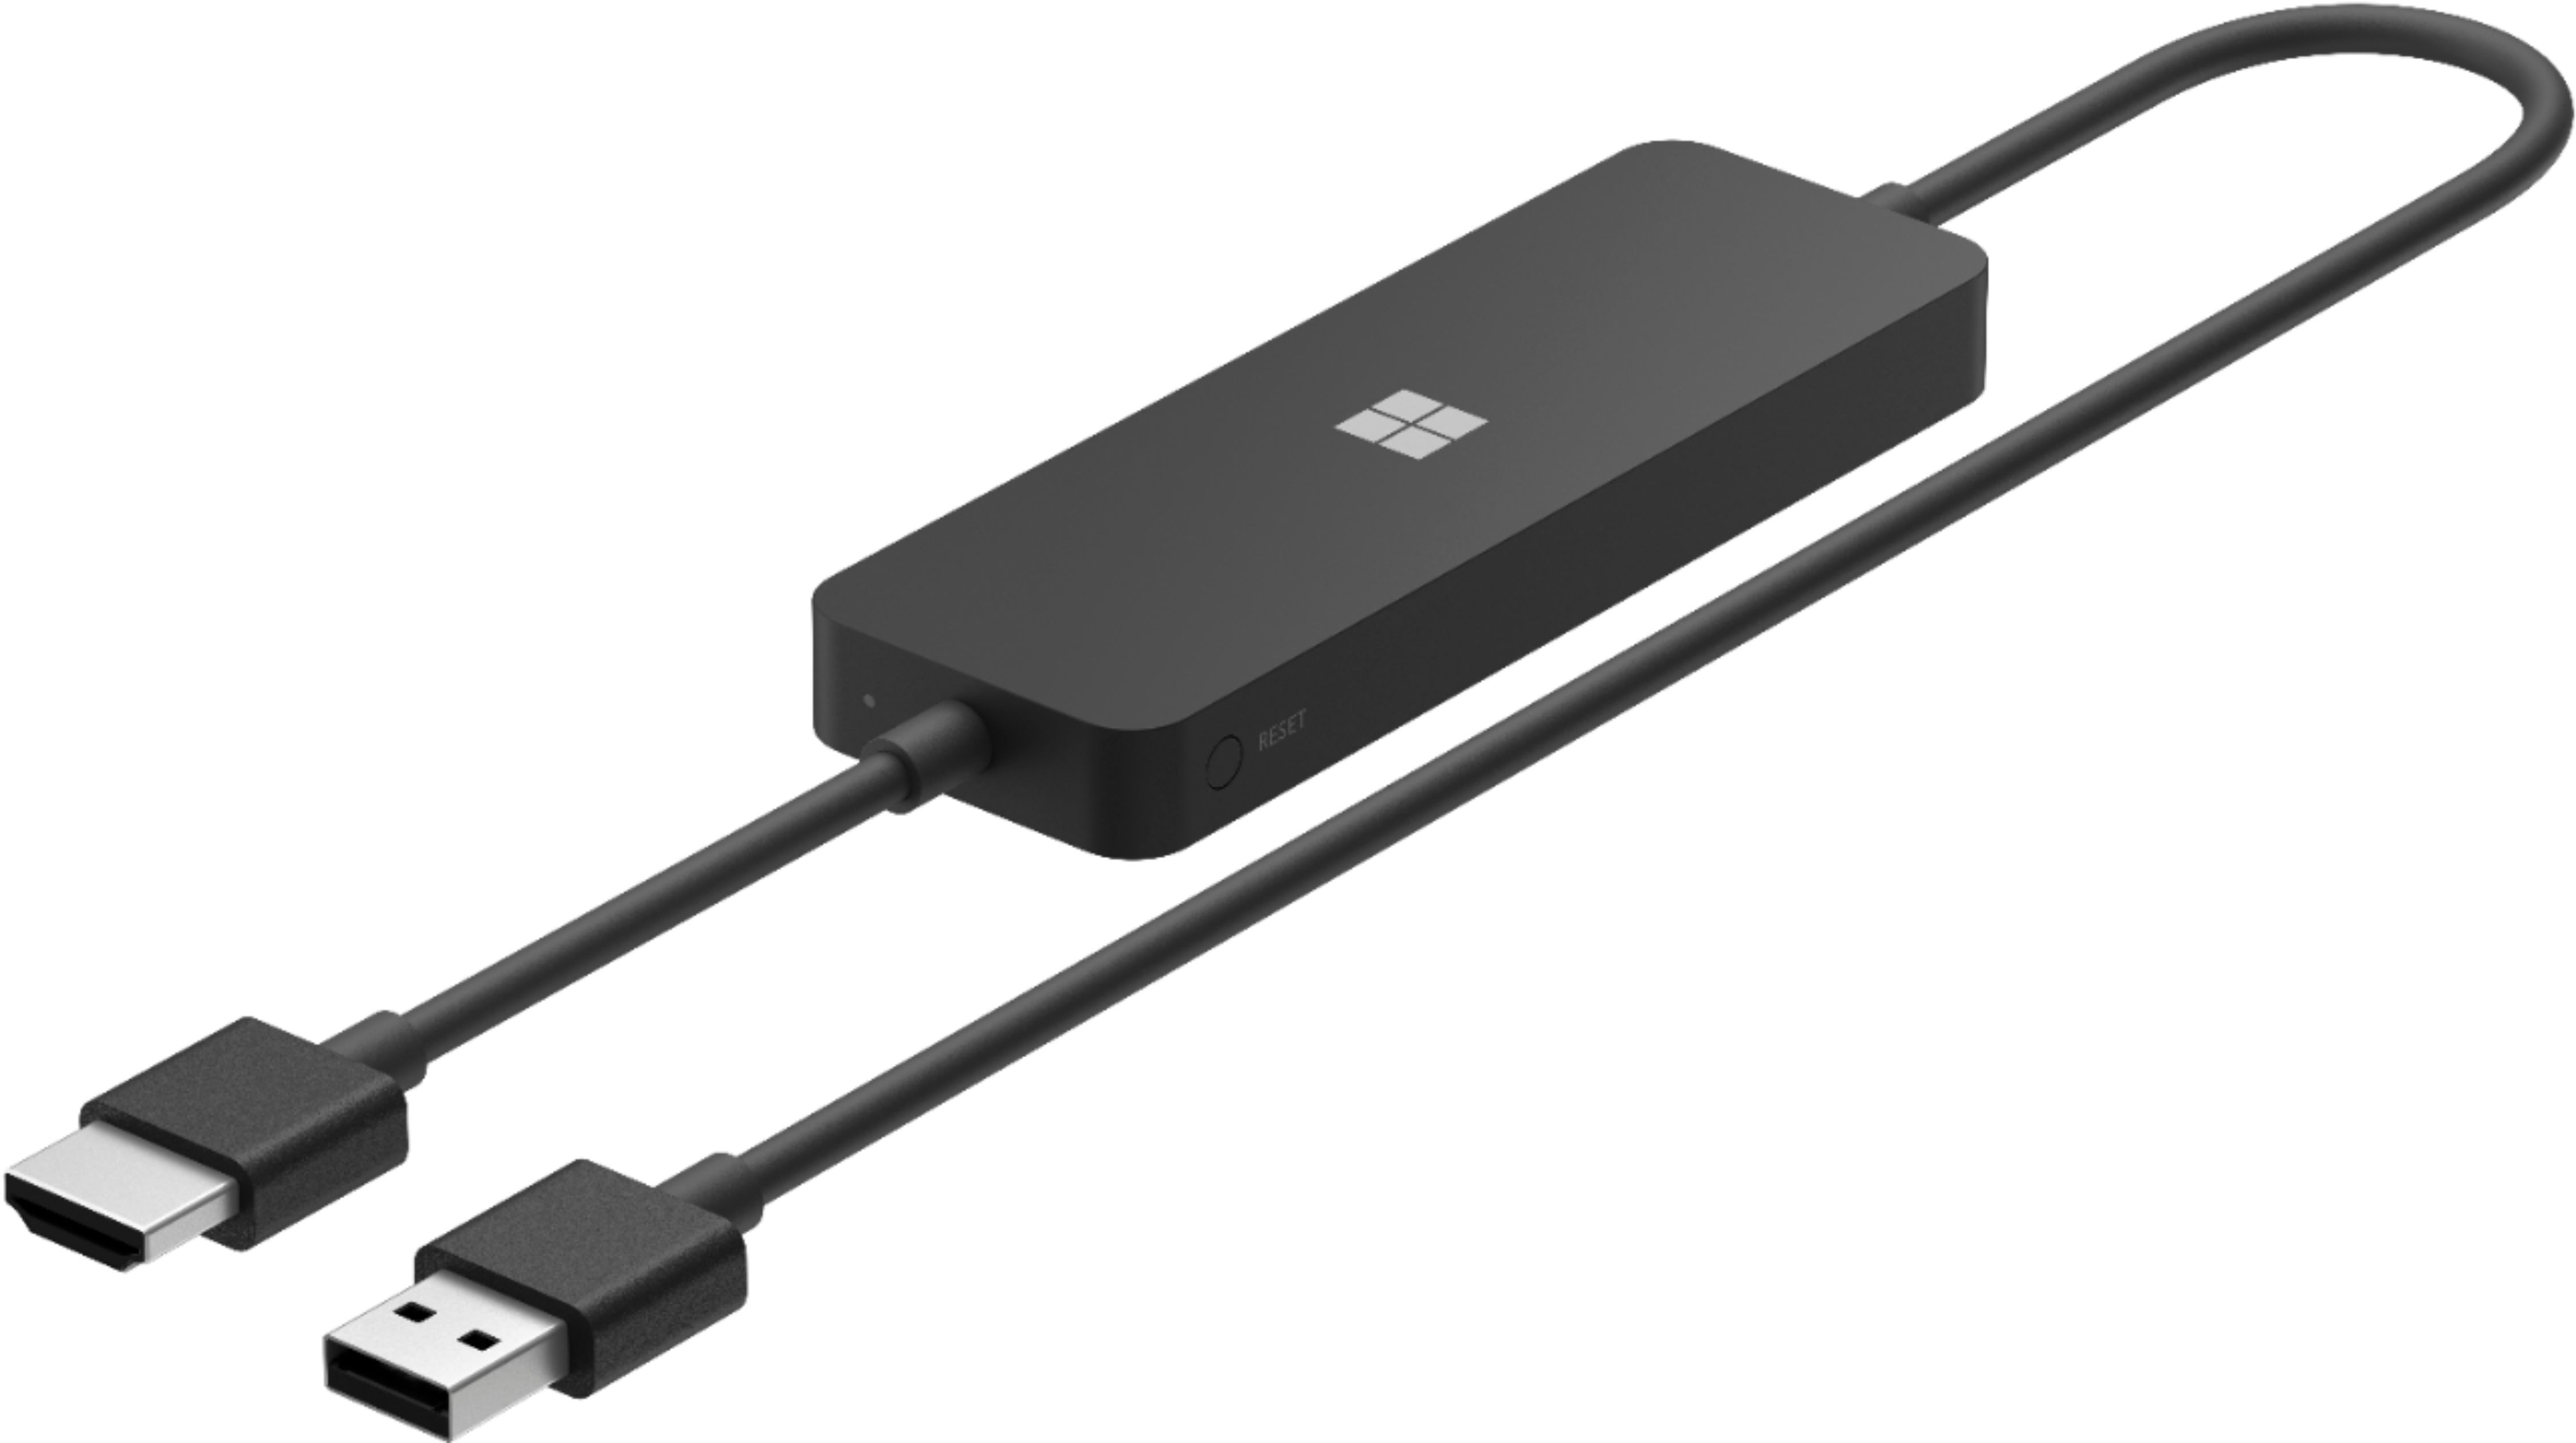 Microsoft 4K Wireless Display Adapter - The best casting solution!